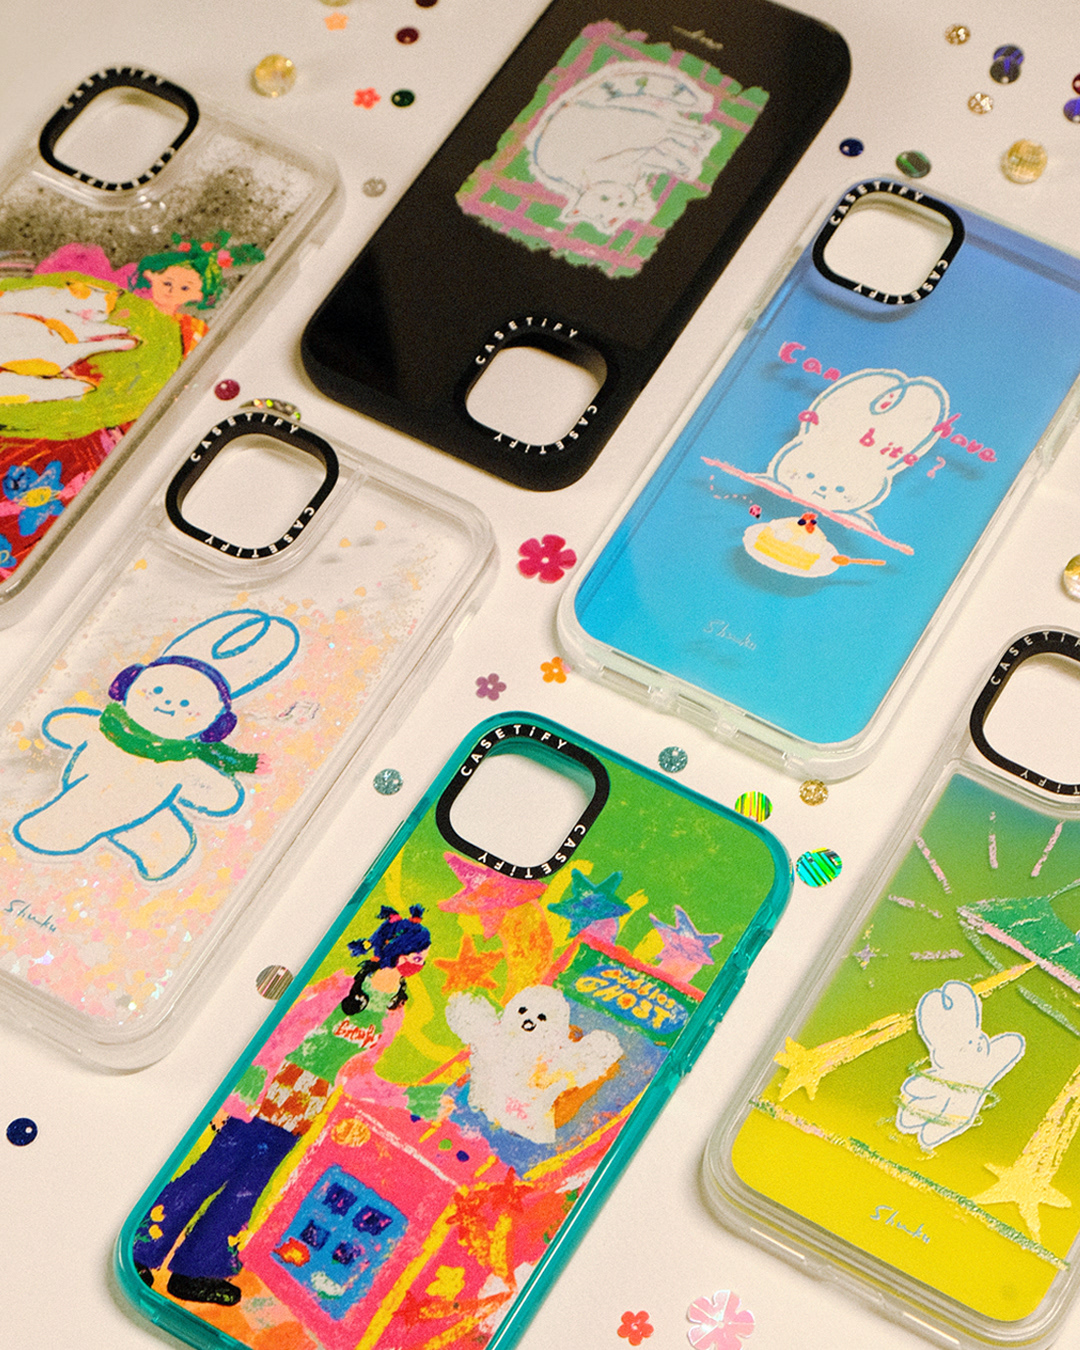 ILLUSTRATION  Character design  casetify phonecase rabbit bunny Illustrator electronic accessories